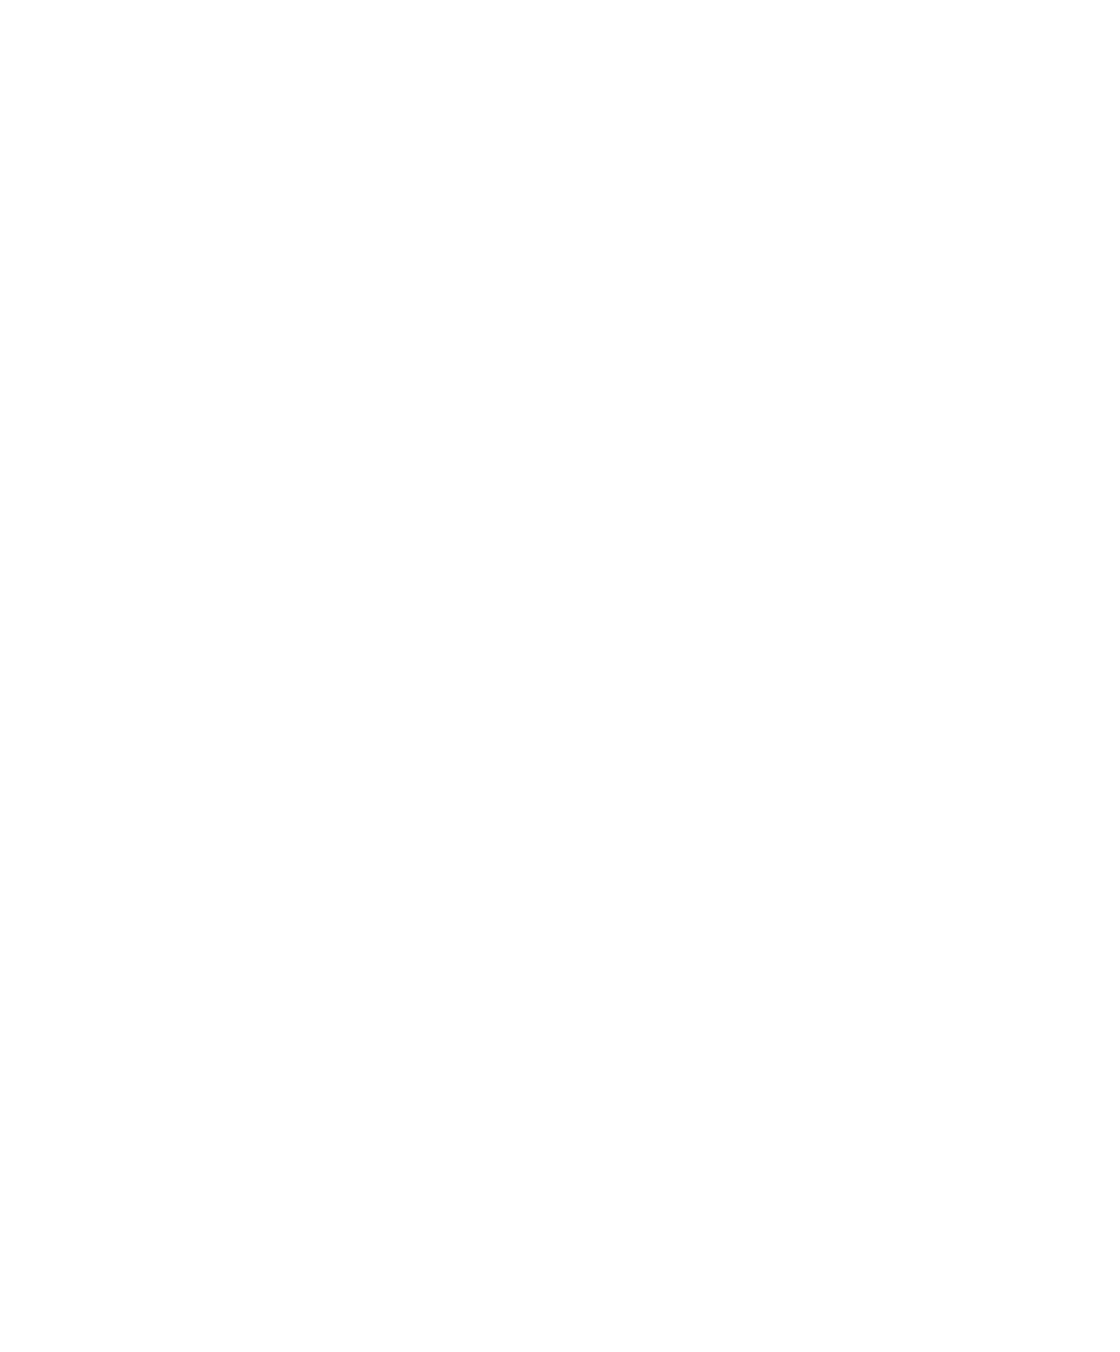 sionicsweaponsystems.com